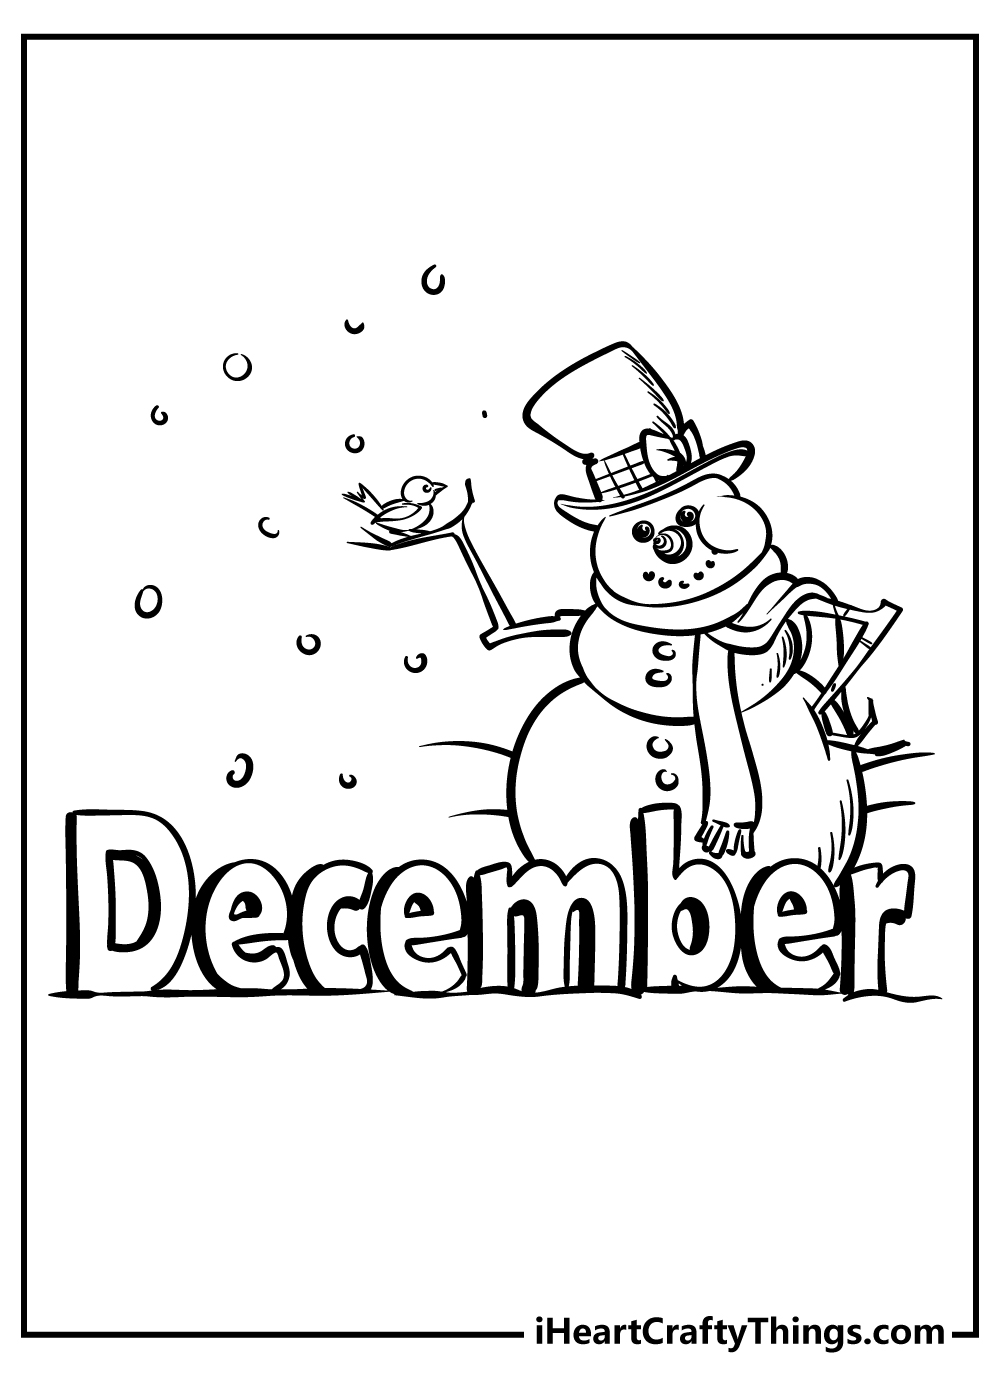 December Coloring Pages for kids free download